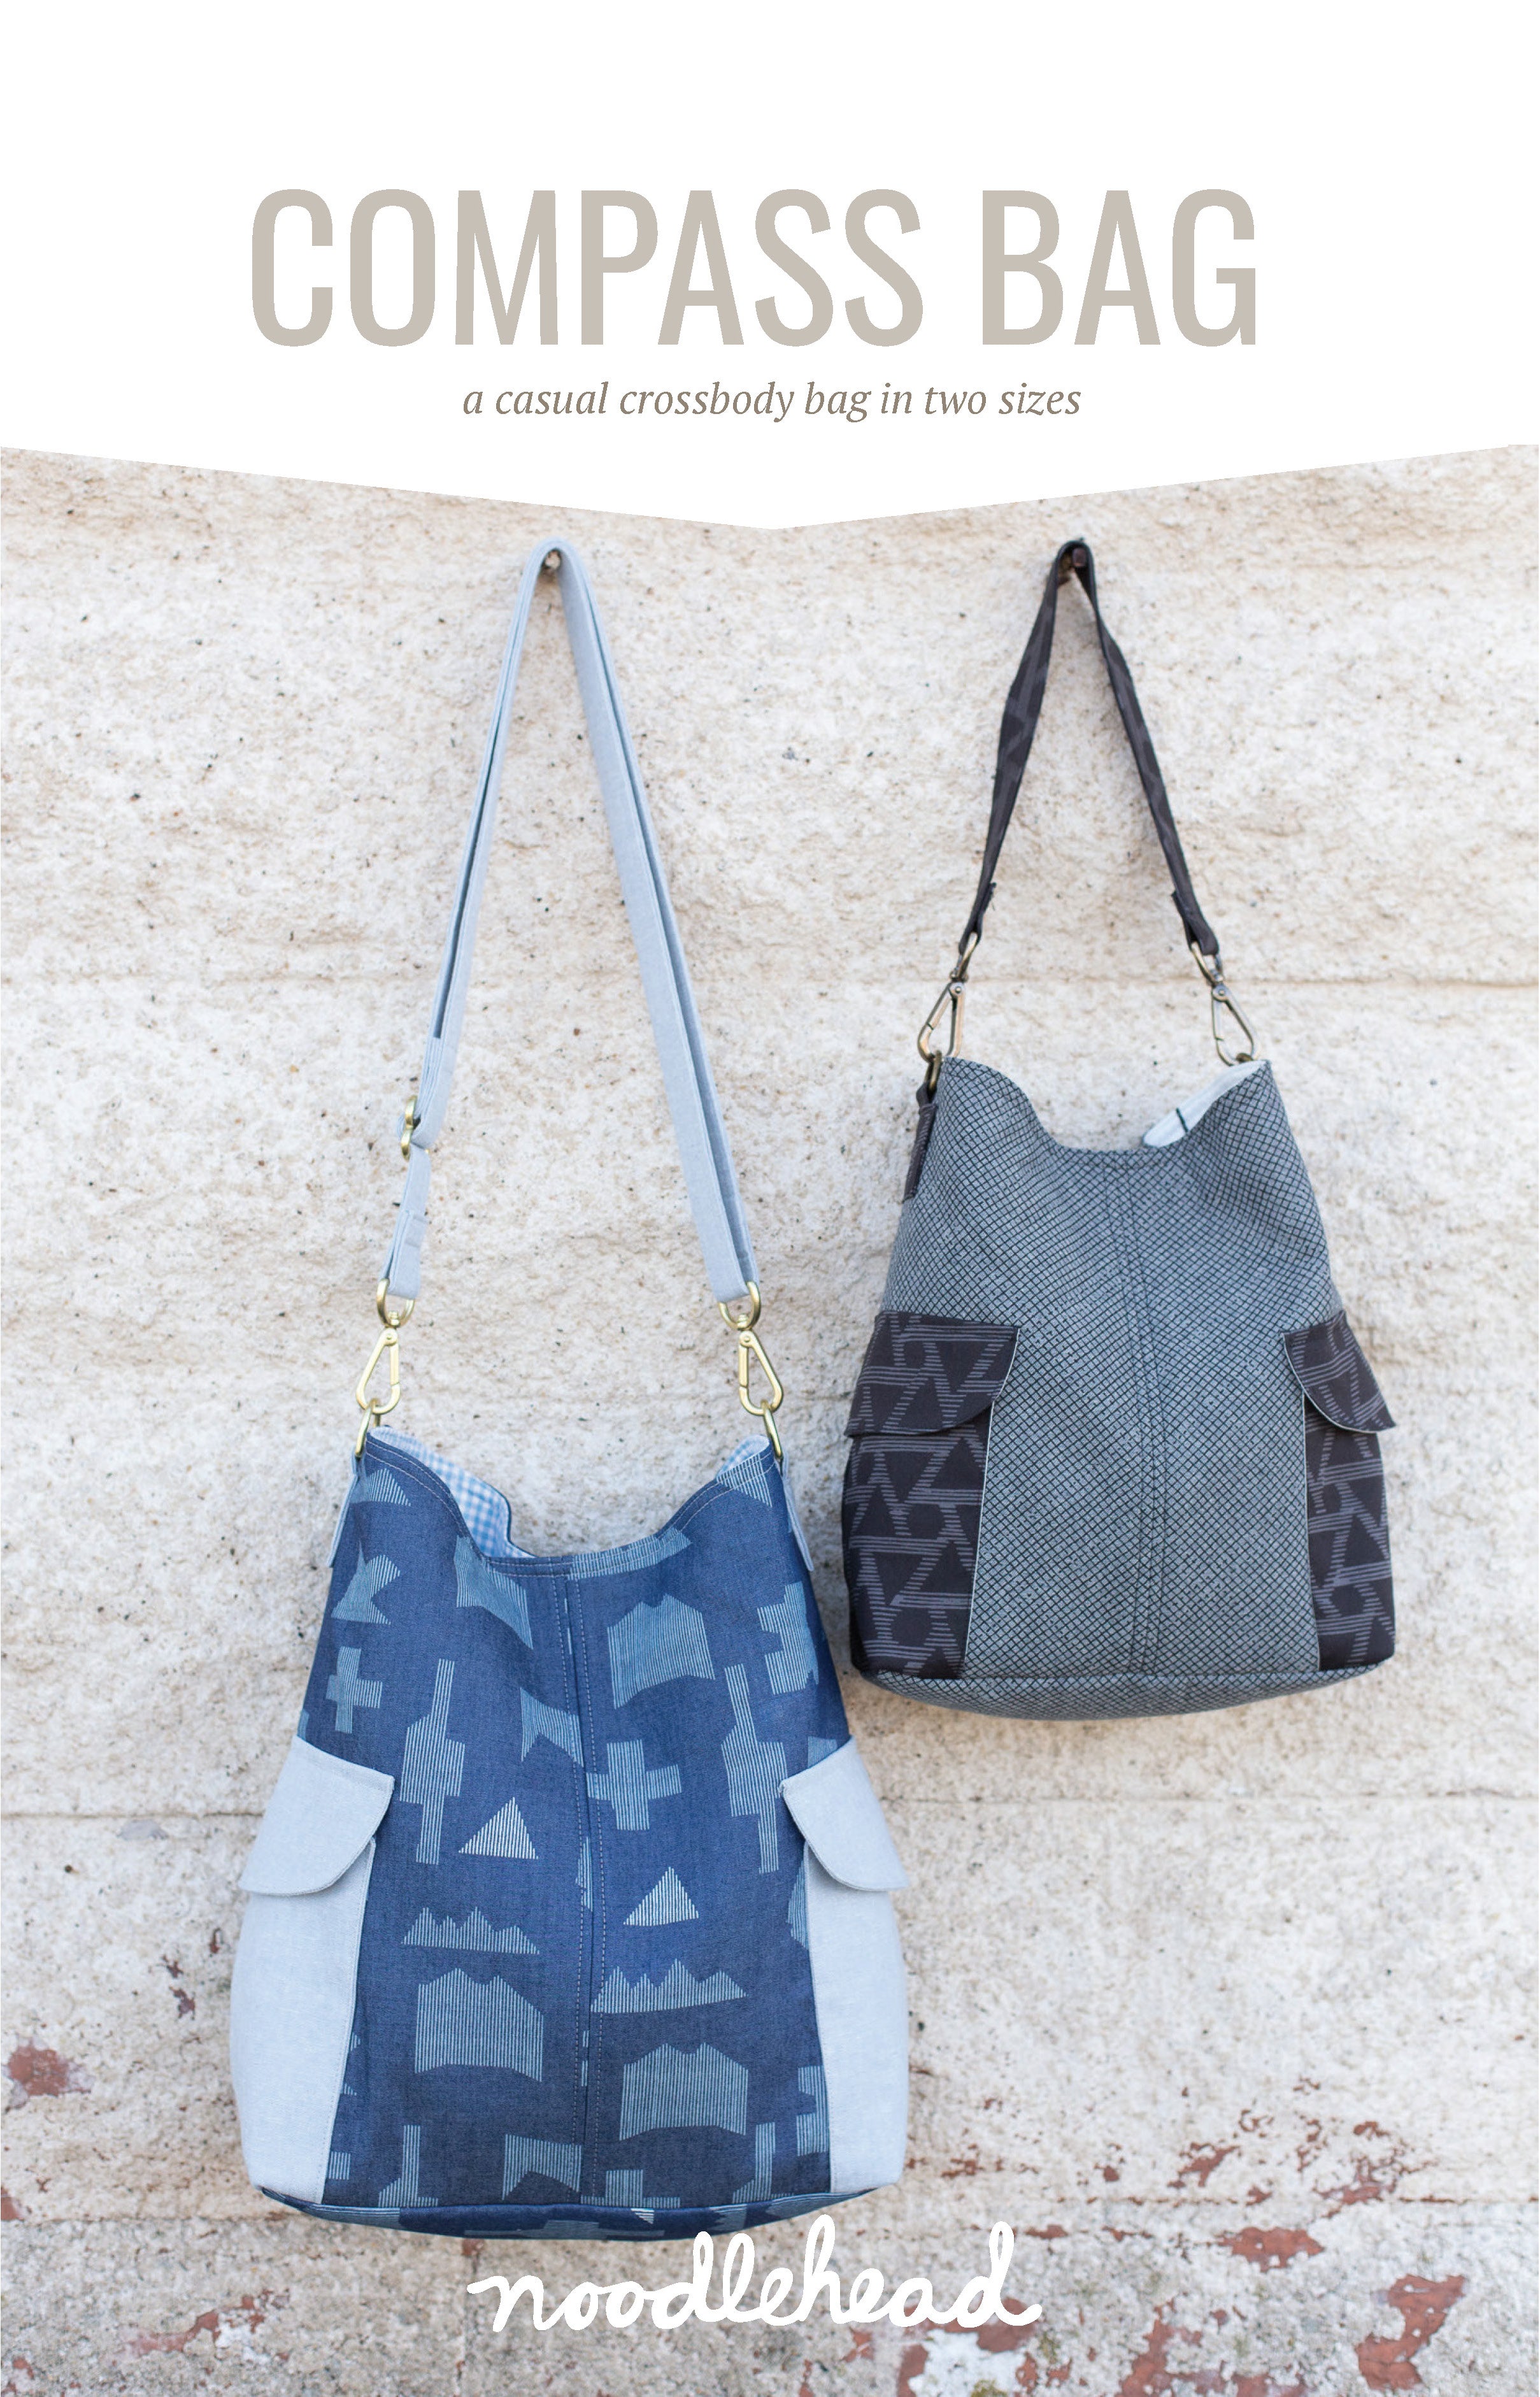 Firefly Tote Bag Sewing Pattern by Noodlehead. Drawstring Tote in